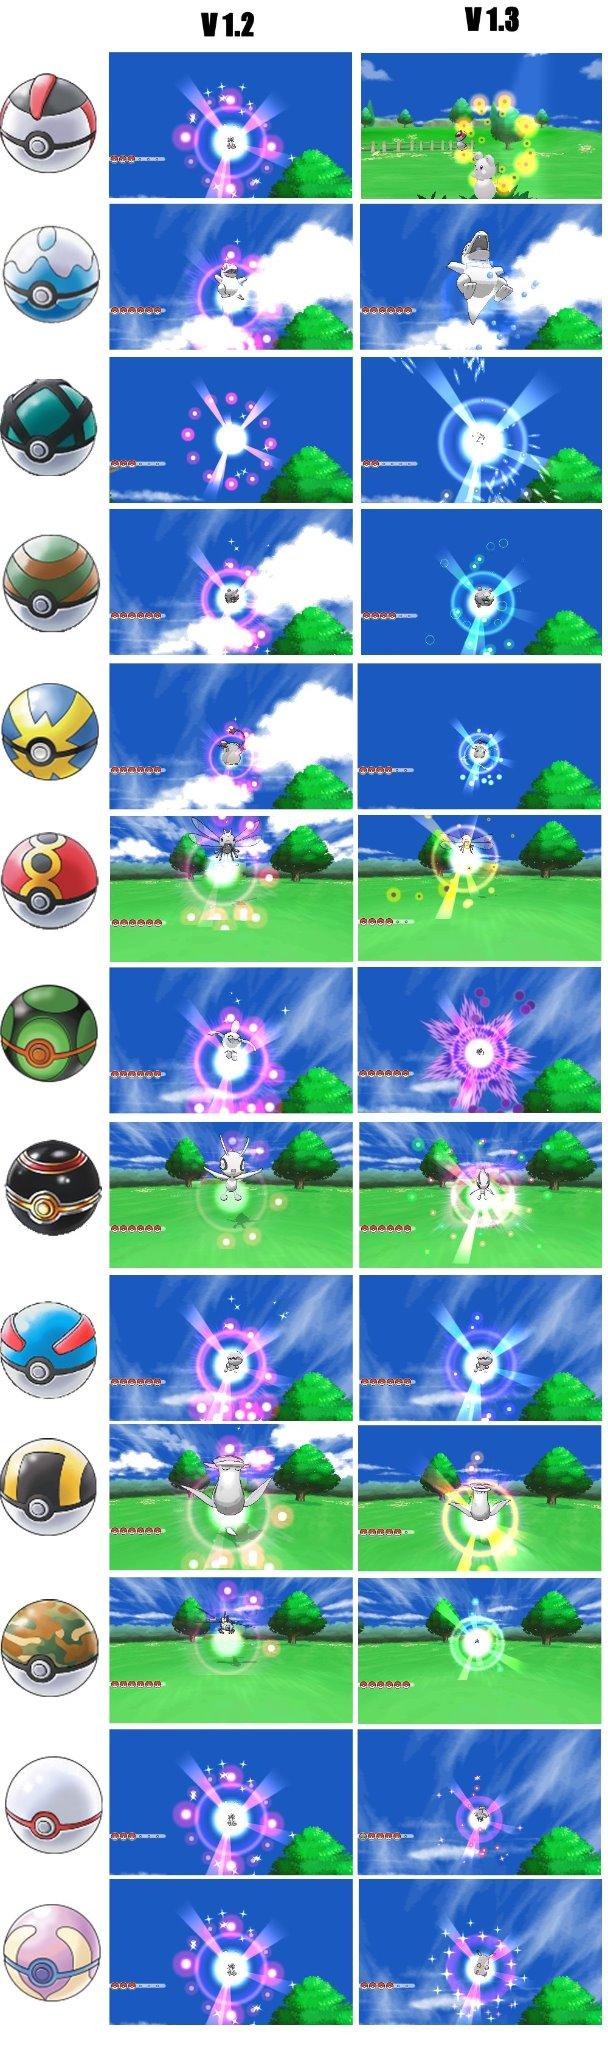 Joe Merrick Updated With Heal Ball And Premier Ball Premier Ball Is Similar To Pokeball But Seems To Have Smaller Energy Orbs Http T Co P1xlh7ho9e Twitter